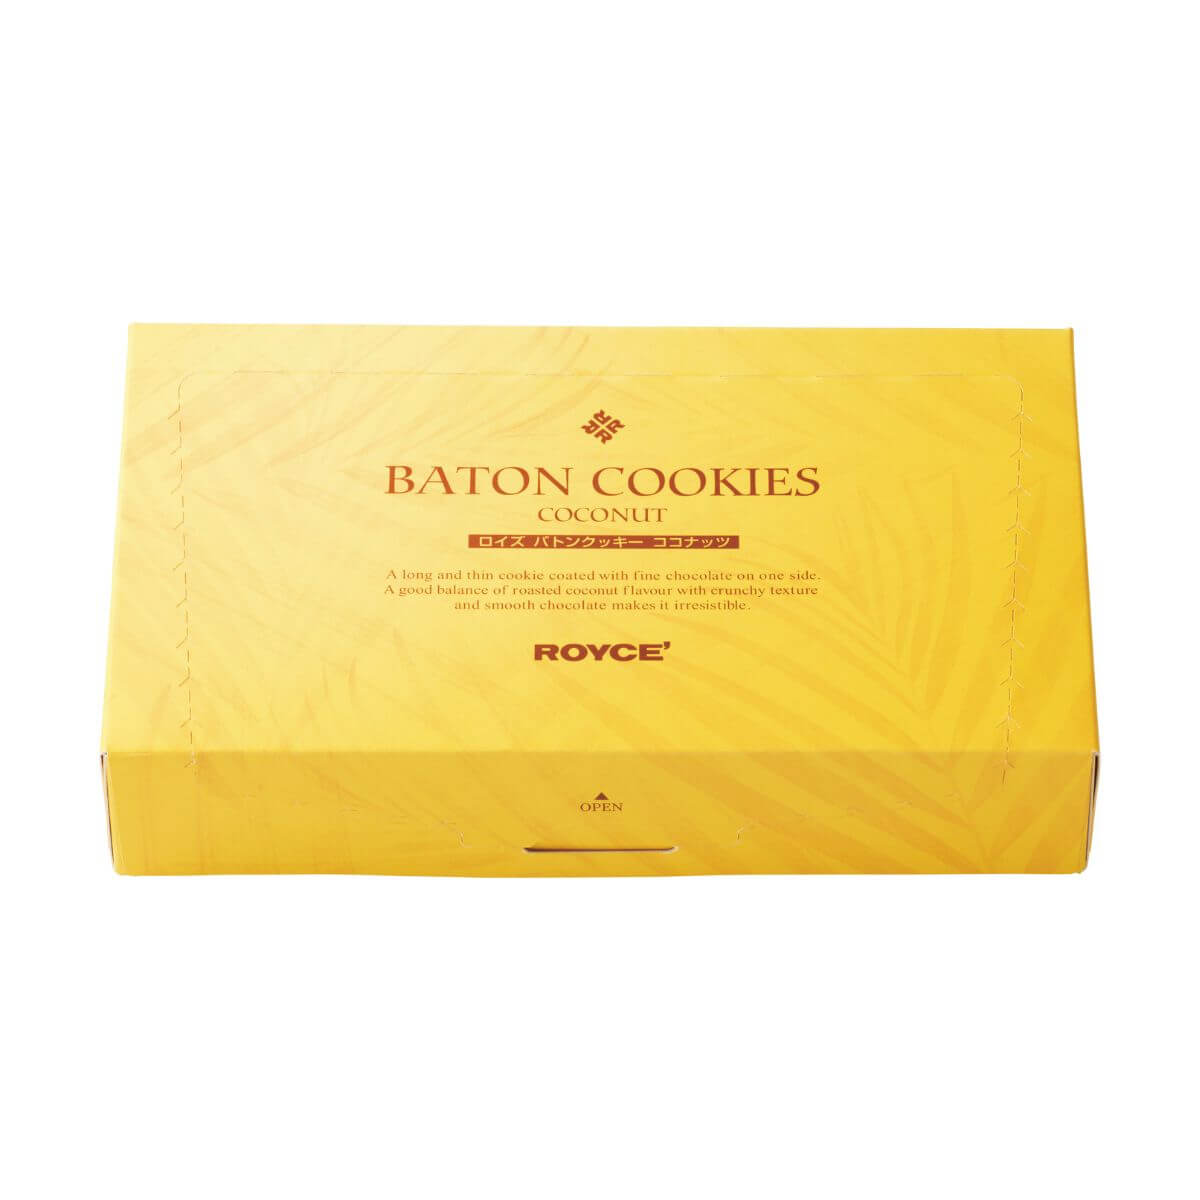 ROYCE' Chocolate - Baton Cookies "Coconut" - Image shows a yellow, rectangular shaped box. Text in middle center says Baton Cookies Coconut A long and thin cookie coated with fine chocolate on one side. A perfect match of toasted coconut flavor with crunchy texture and smooth chocolate makes it irresistible. ROYCE'.